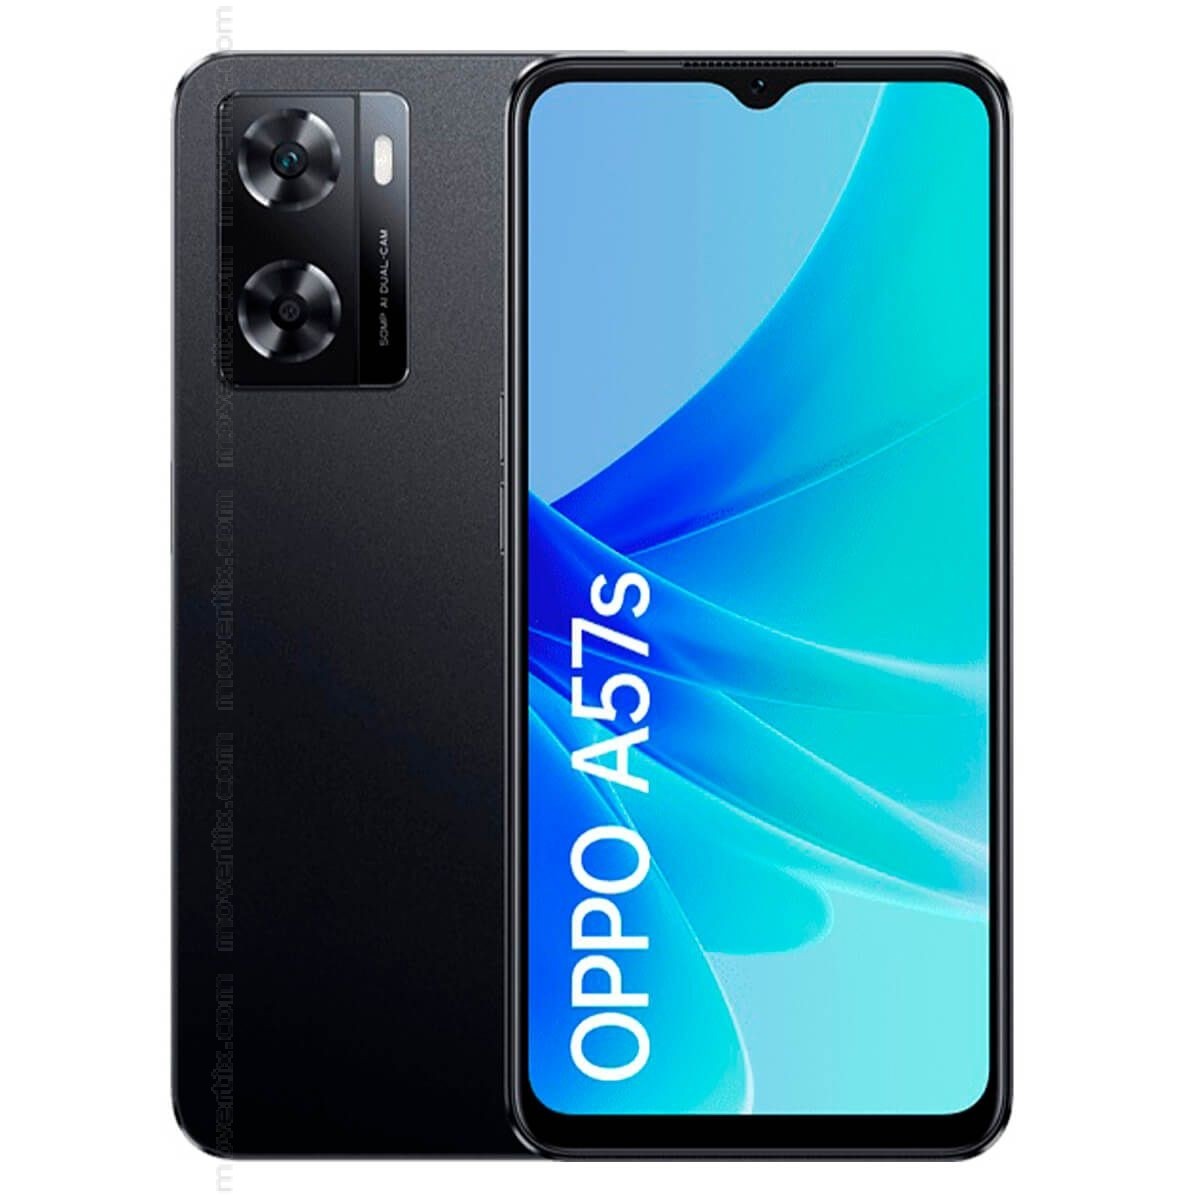 OPPO A57s 64GB Starry Black desde 185,31 €